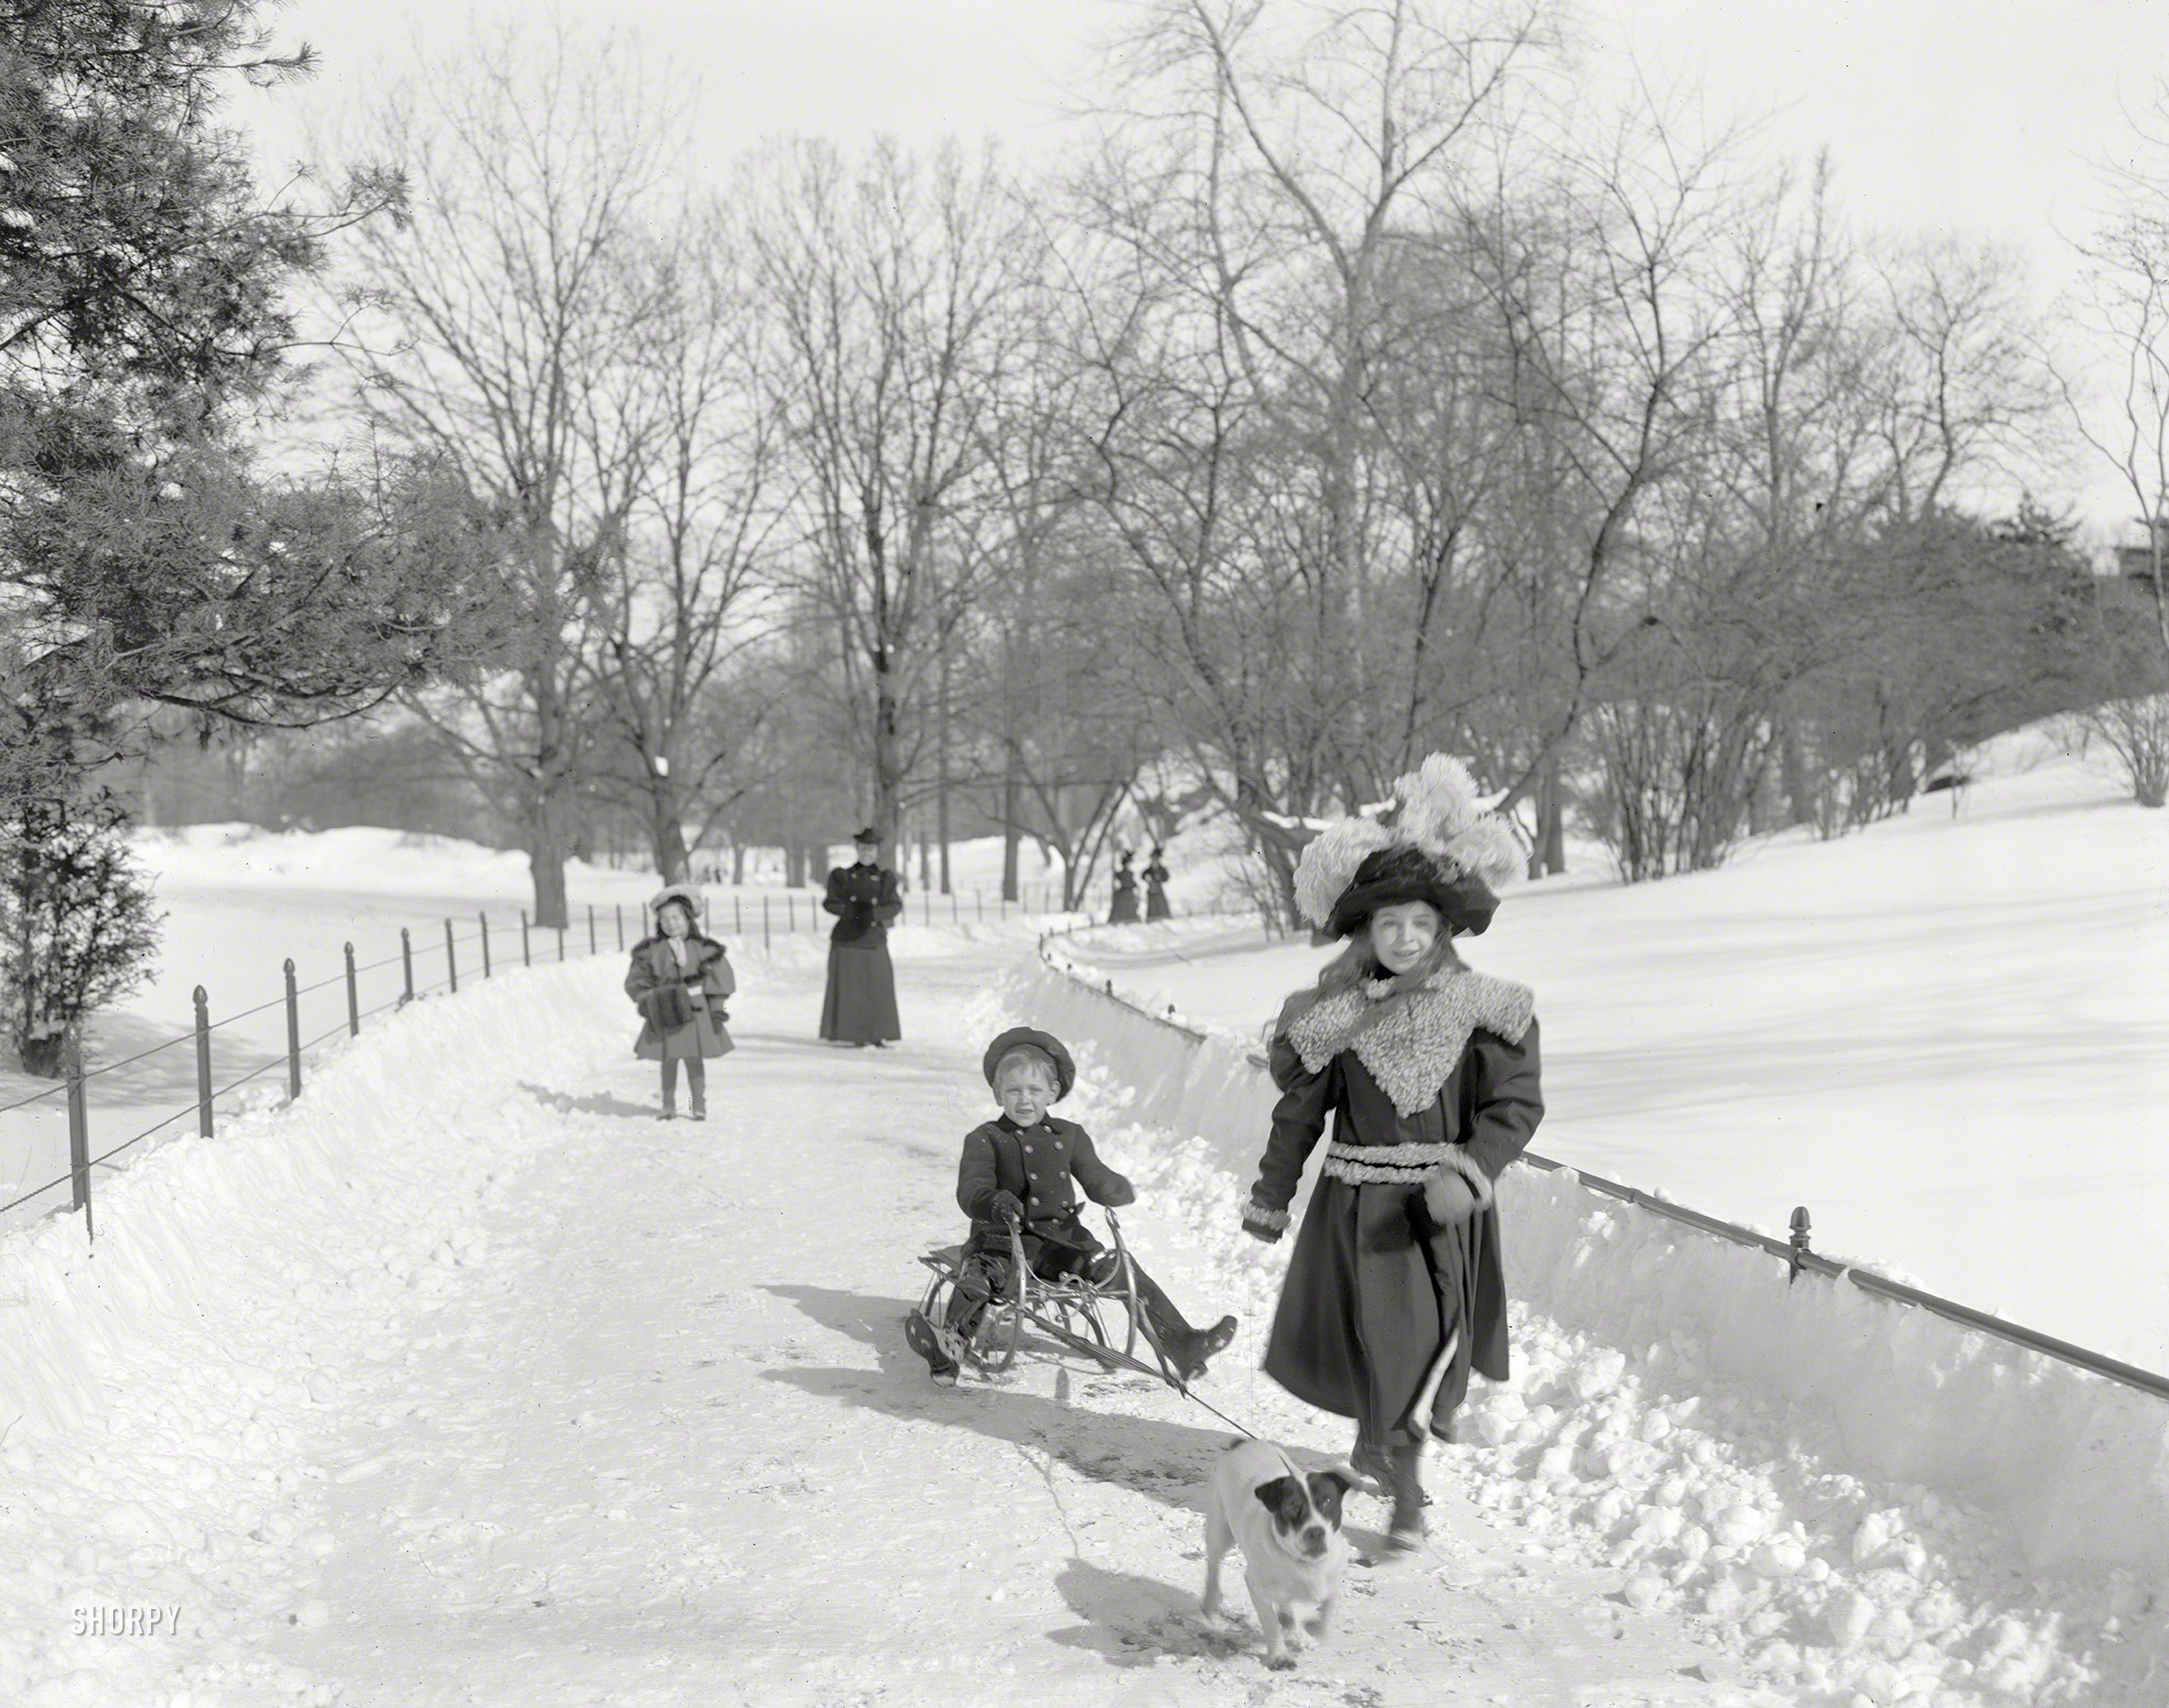 New York circa 1900. "Snow in Central Park." Mush, Rover! Mush! 8x10 inch glass plate by "Byron" for the Detroit Photographic Company. View full size.